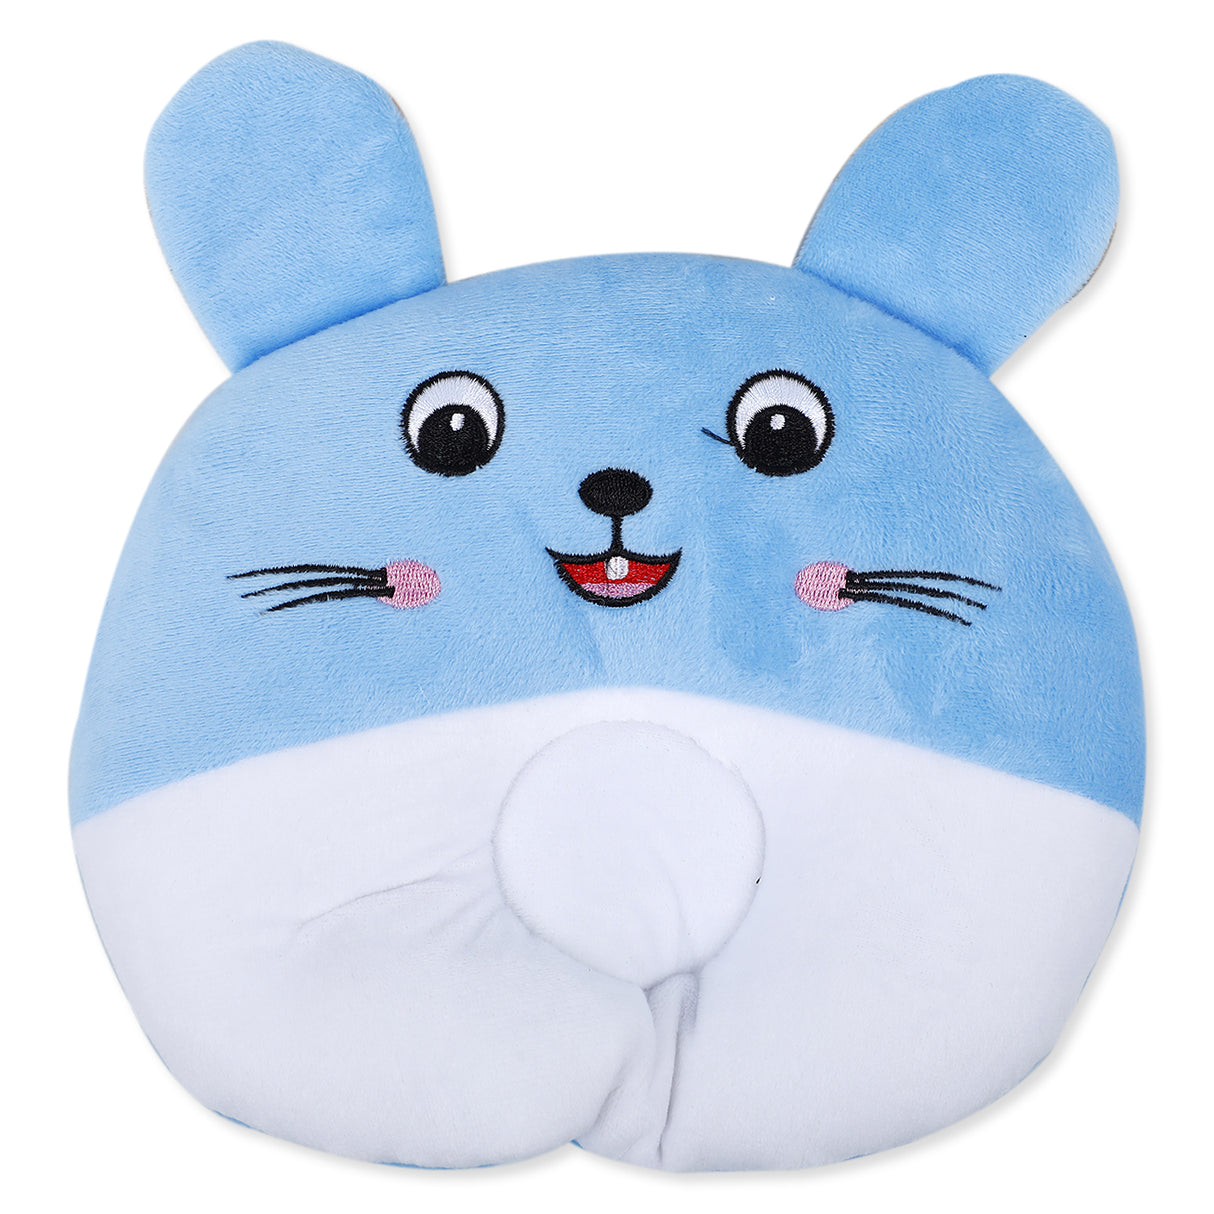 Smiling Mouse Playful Soft And Cozy Pillow